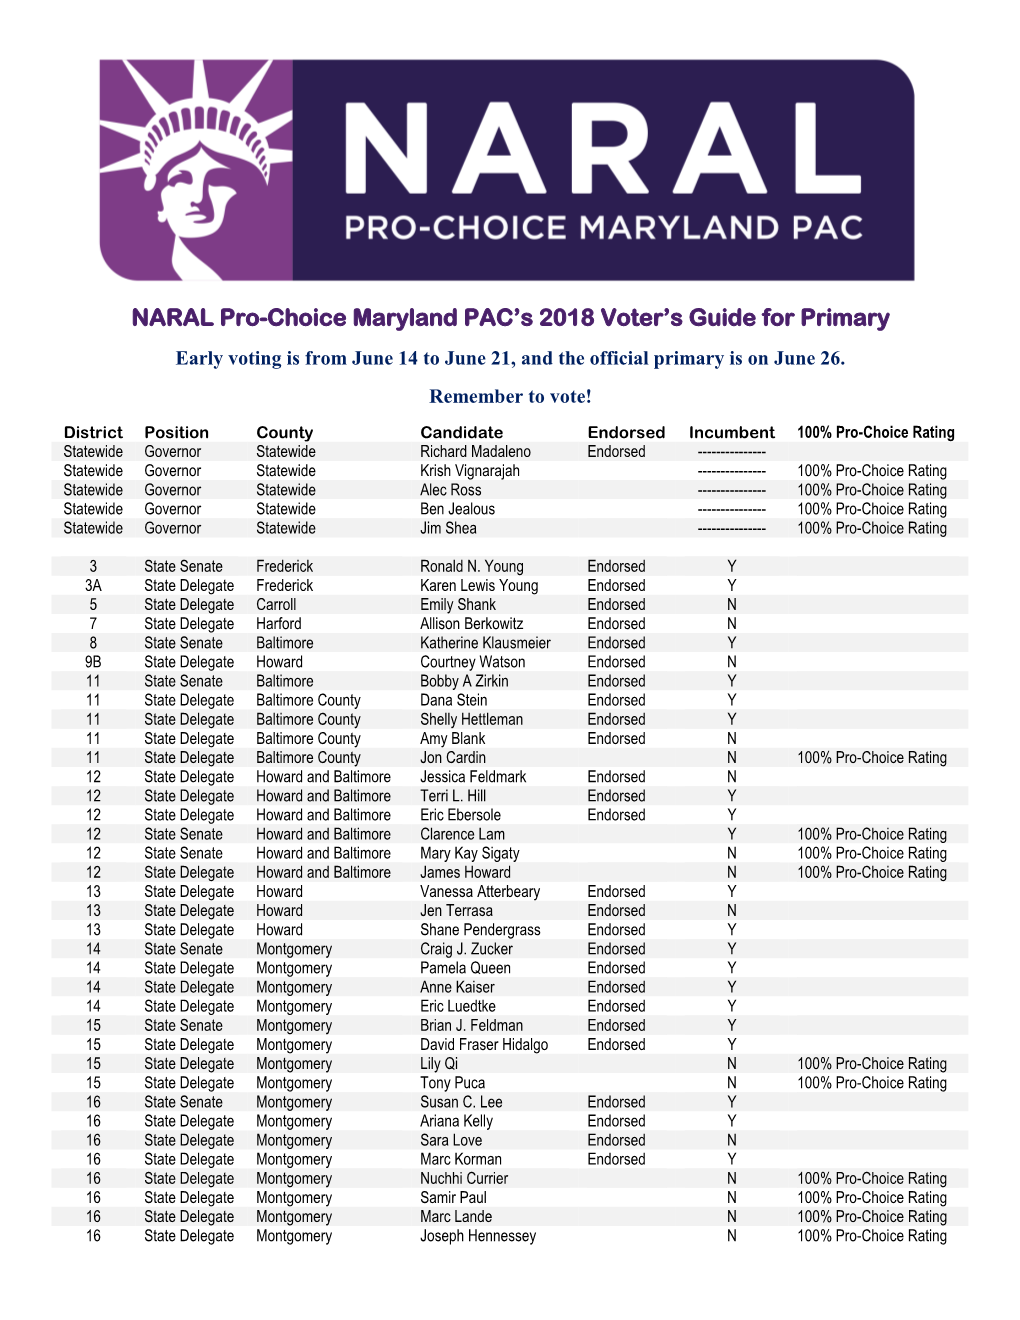 NARAL Pro-Choice Maryland PAC's 2018 Voter's Guide for Primary